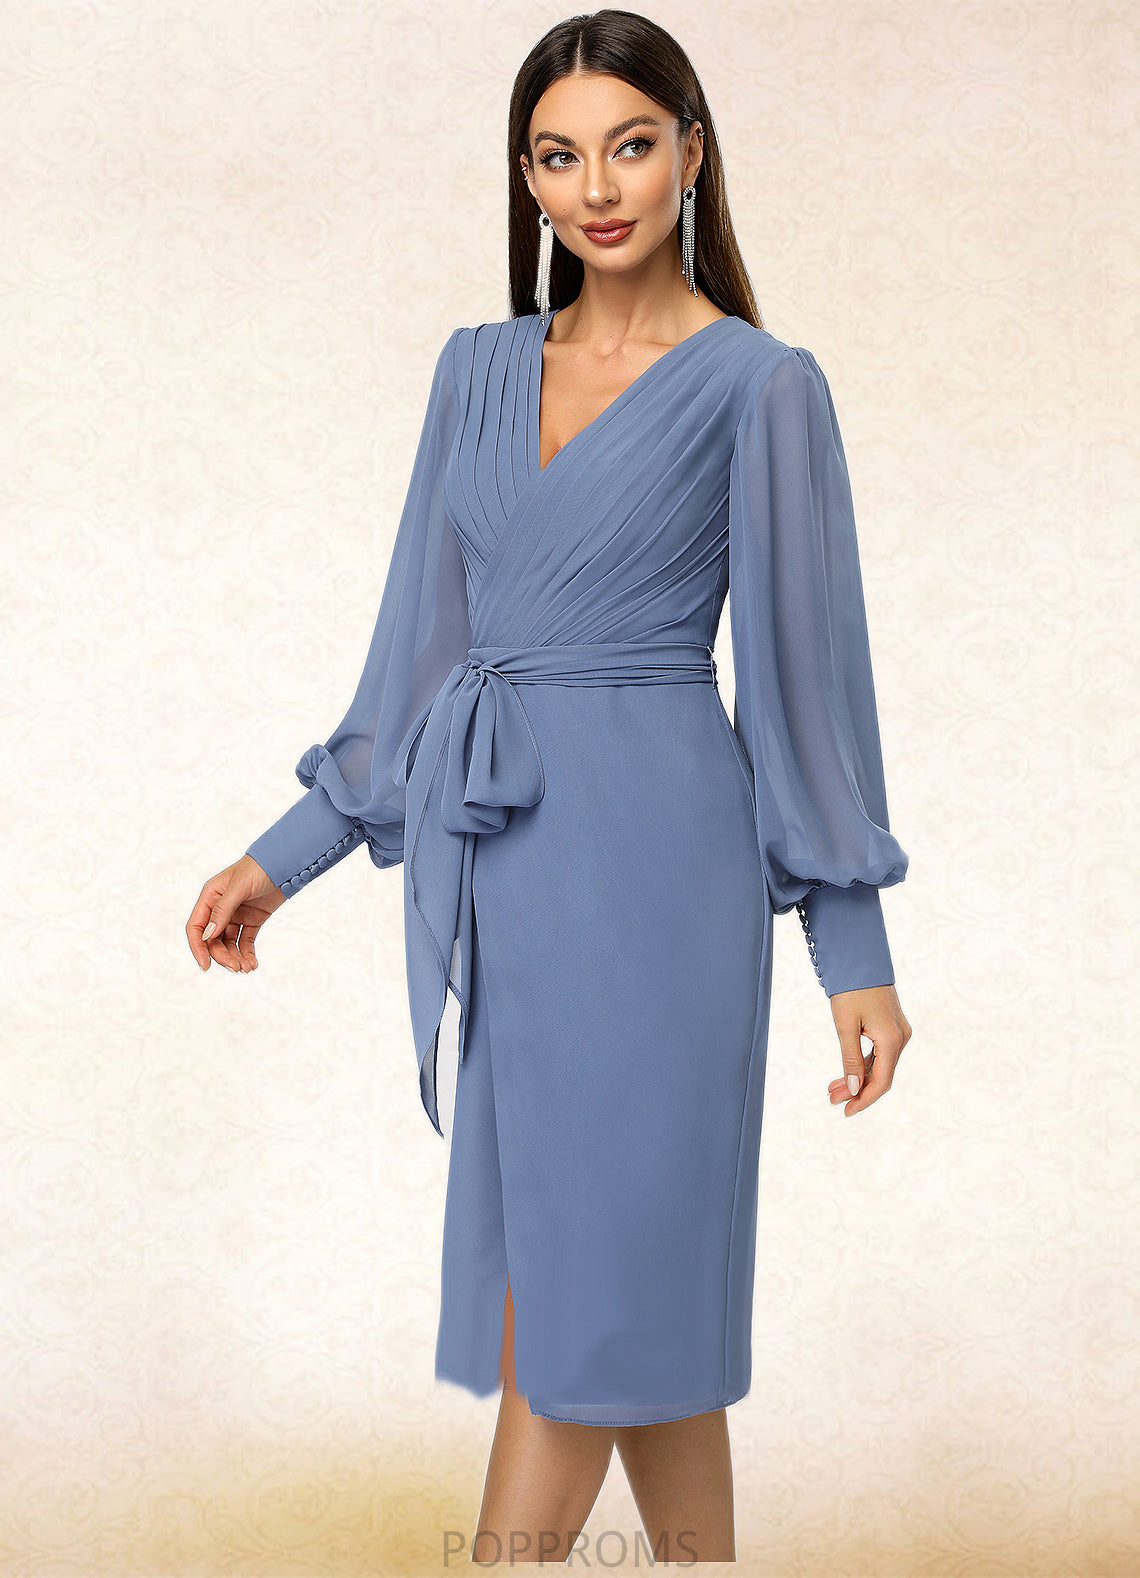 Joselyn Sheath/Column V-Neck Knee-Length Chiffon Cocktail Dress With Bow Pleated PP6P0022484